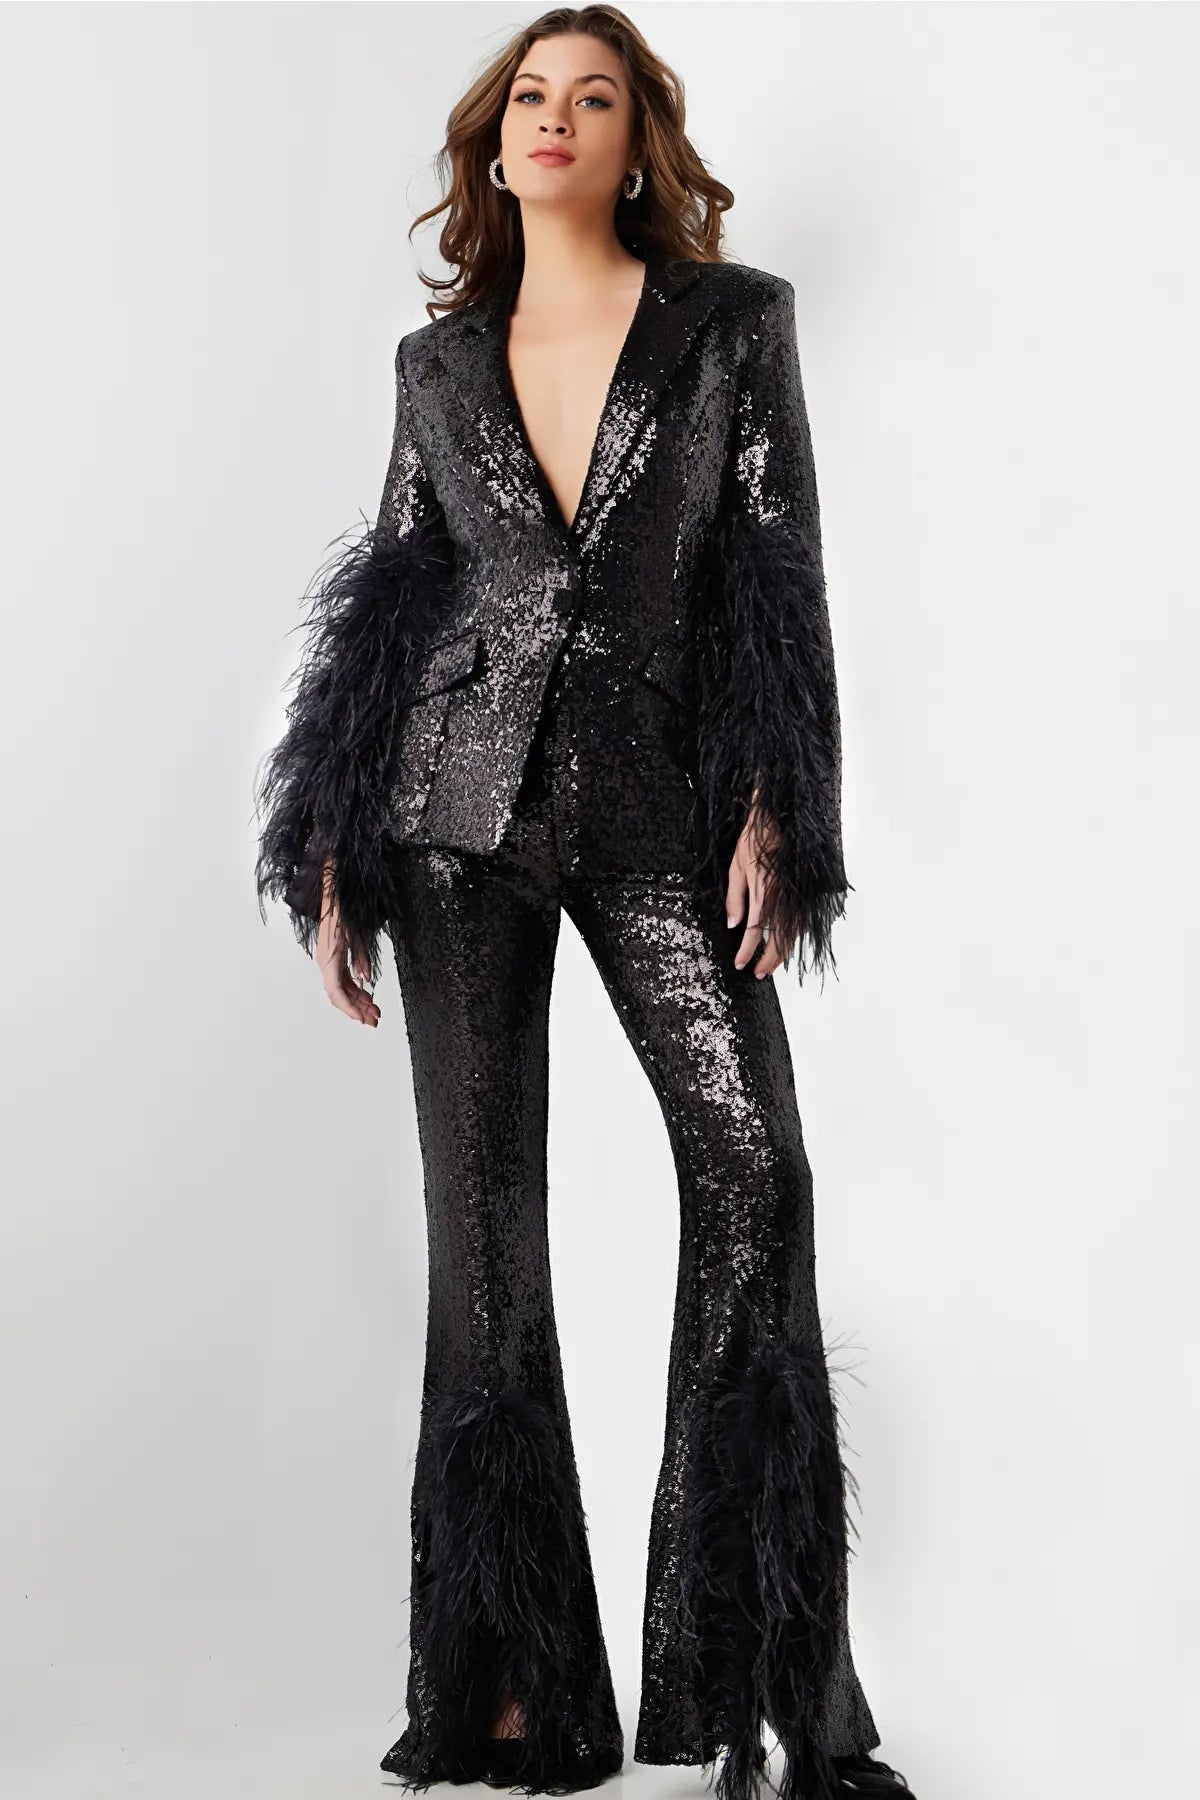 Image of Jovani 23162 - V-Neck Sequin Feathers Pant Suit